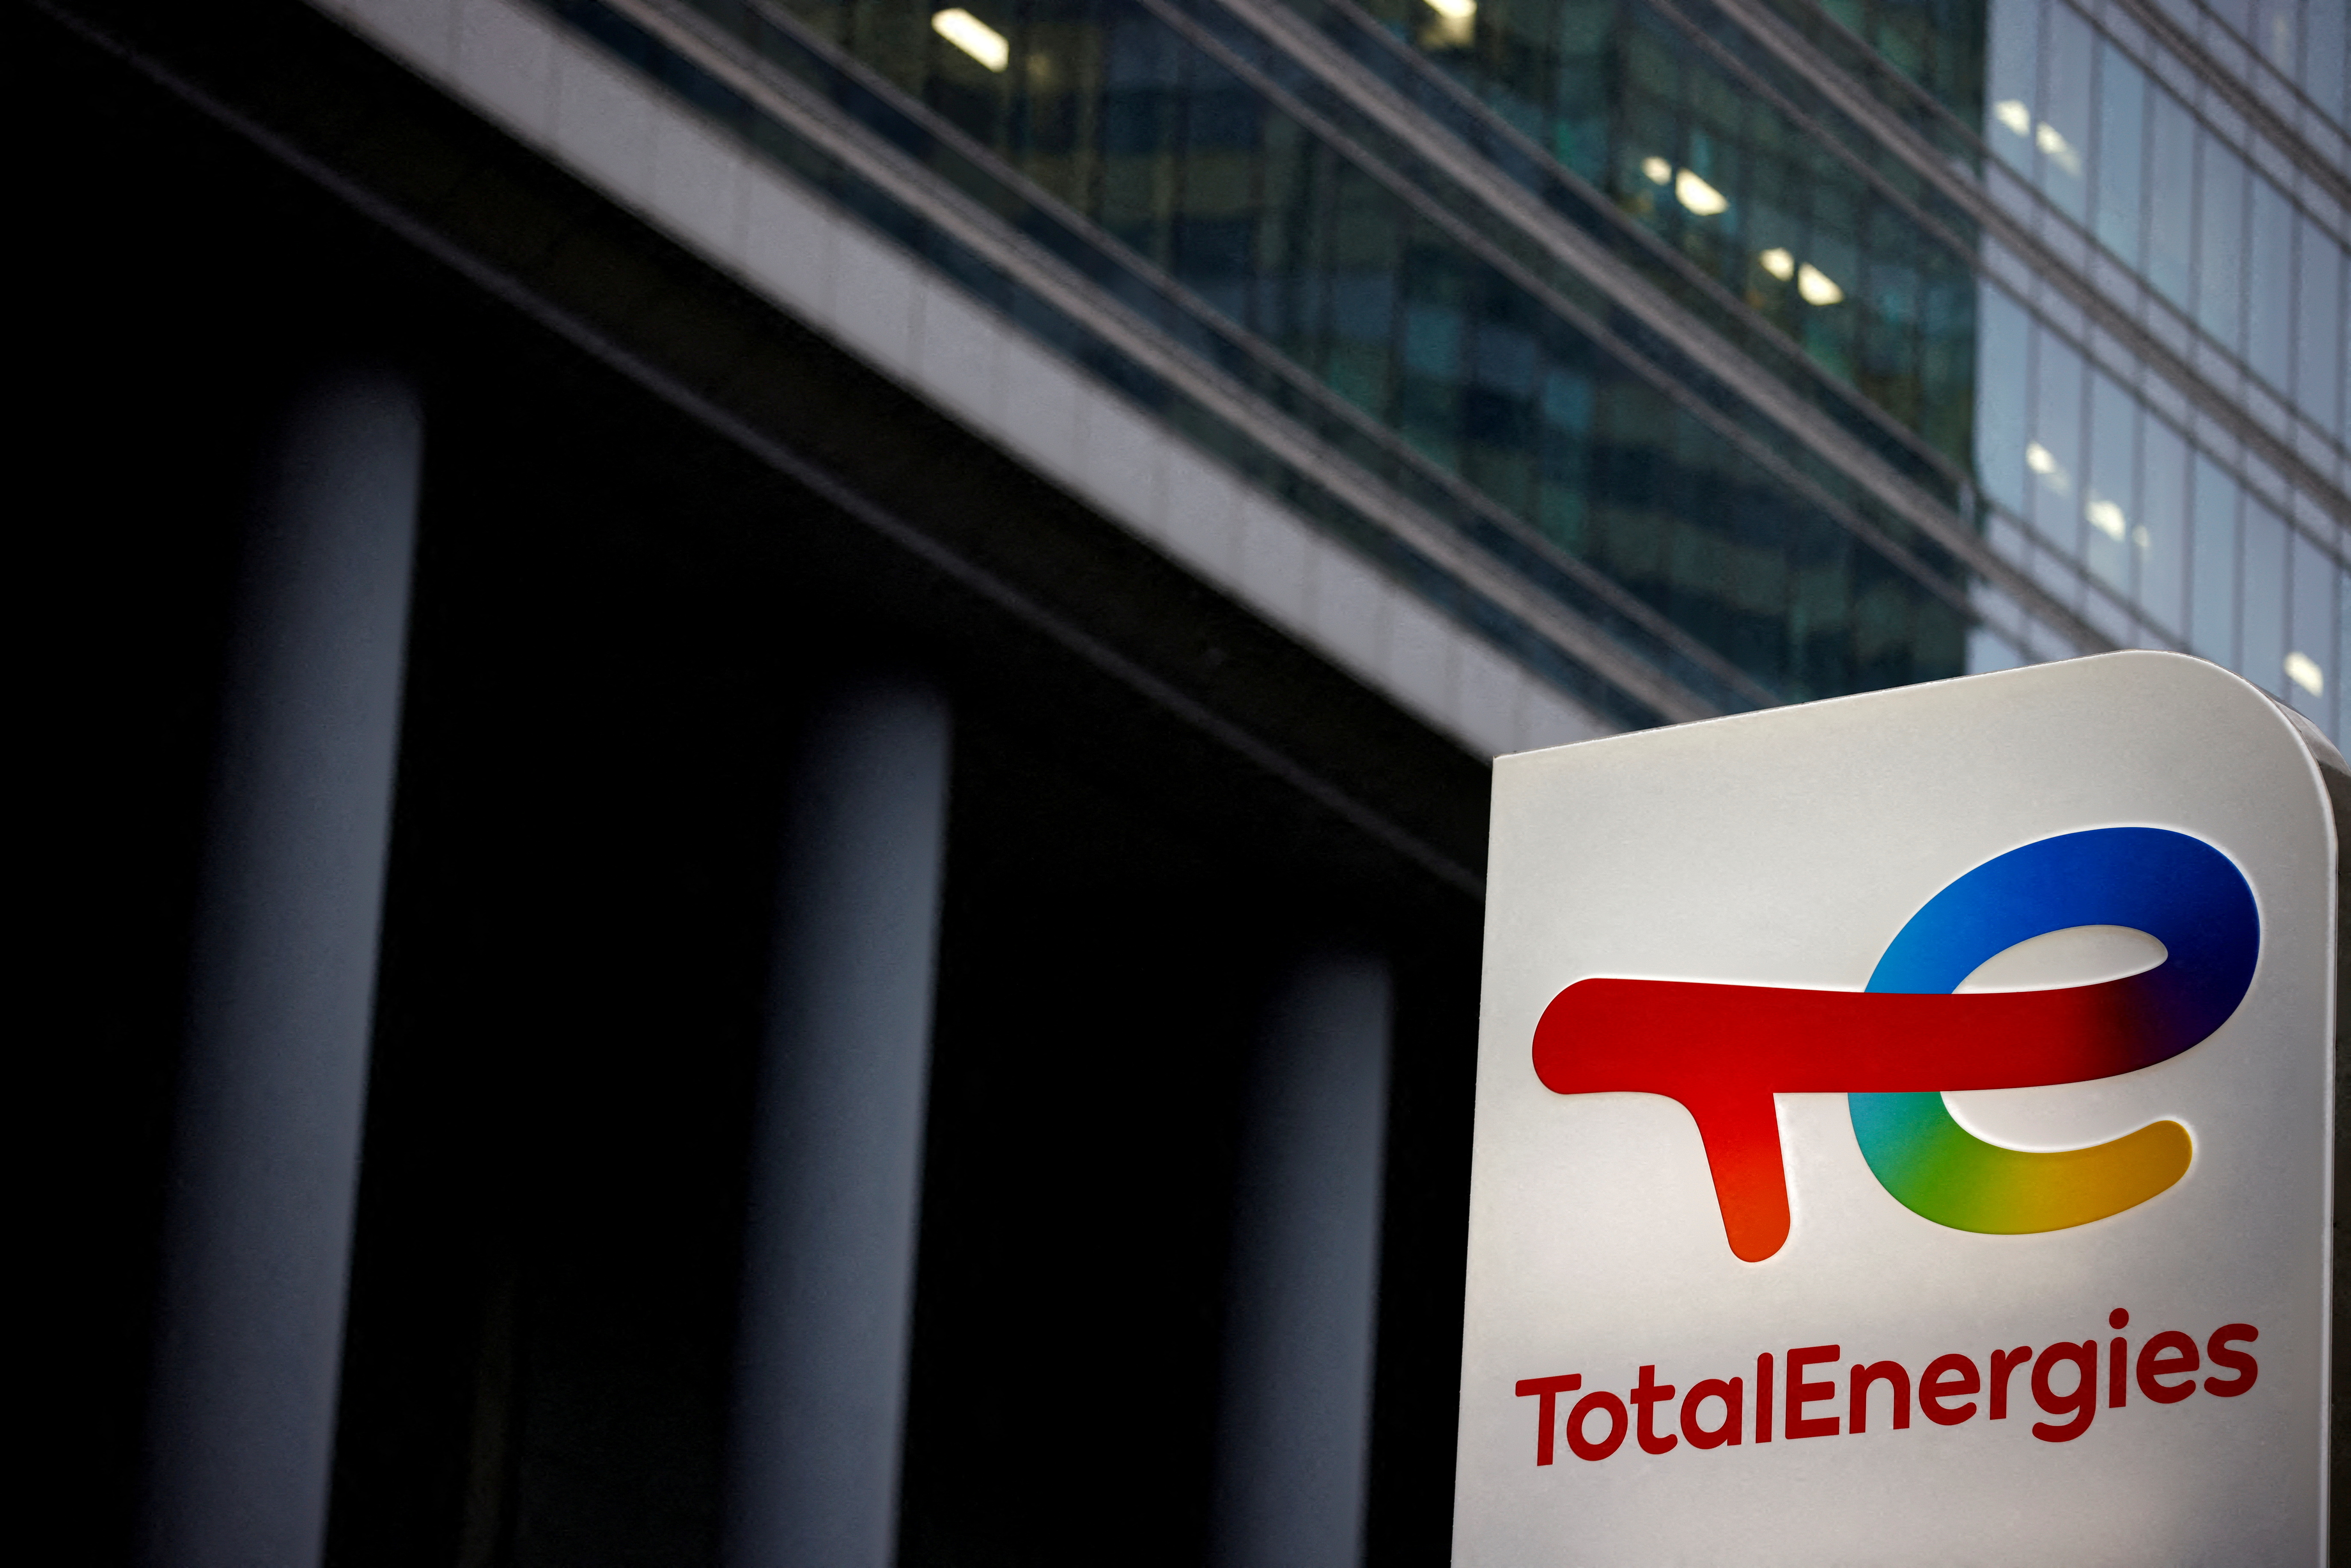 The logo of French oil and gas company TotalEnergies is pictured at an electric car charging station in Courbevoie